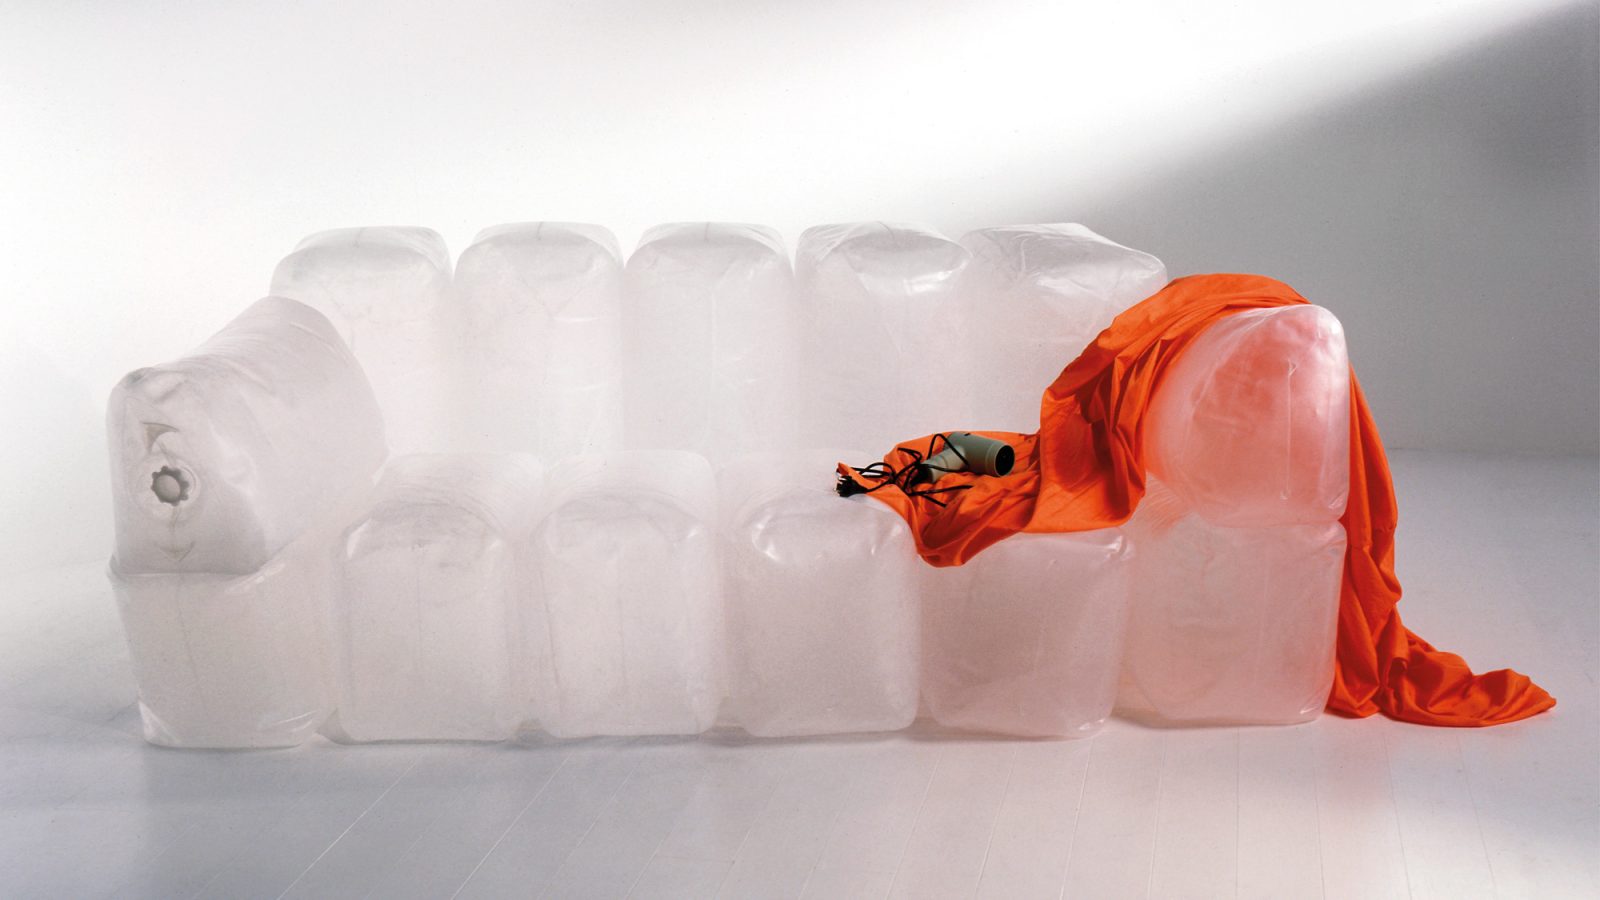 A hair dryer sits on top of the inflatable sofa INNERLIG. An orange textile cover is draped over one armrest.